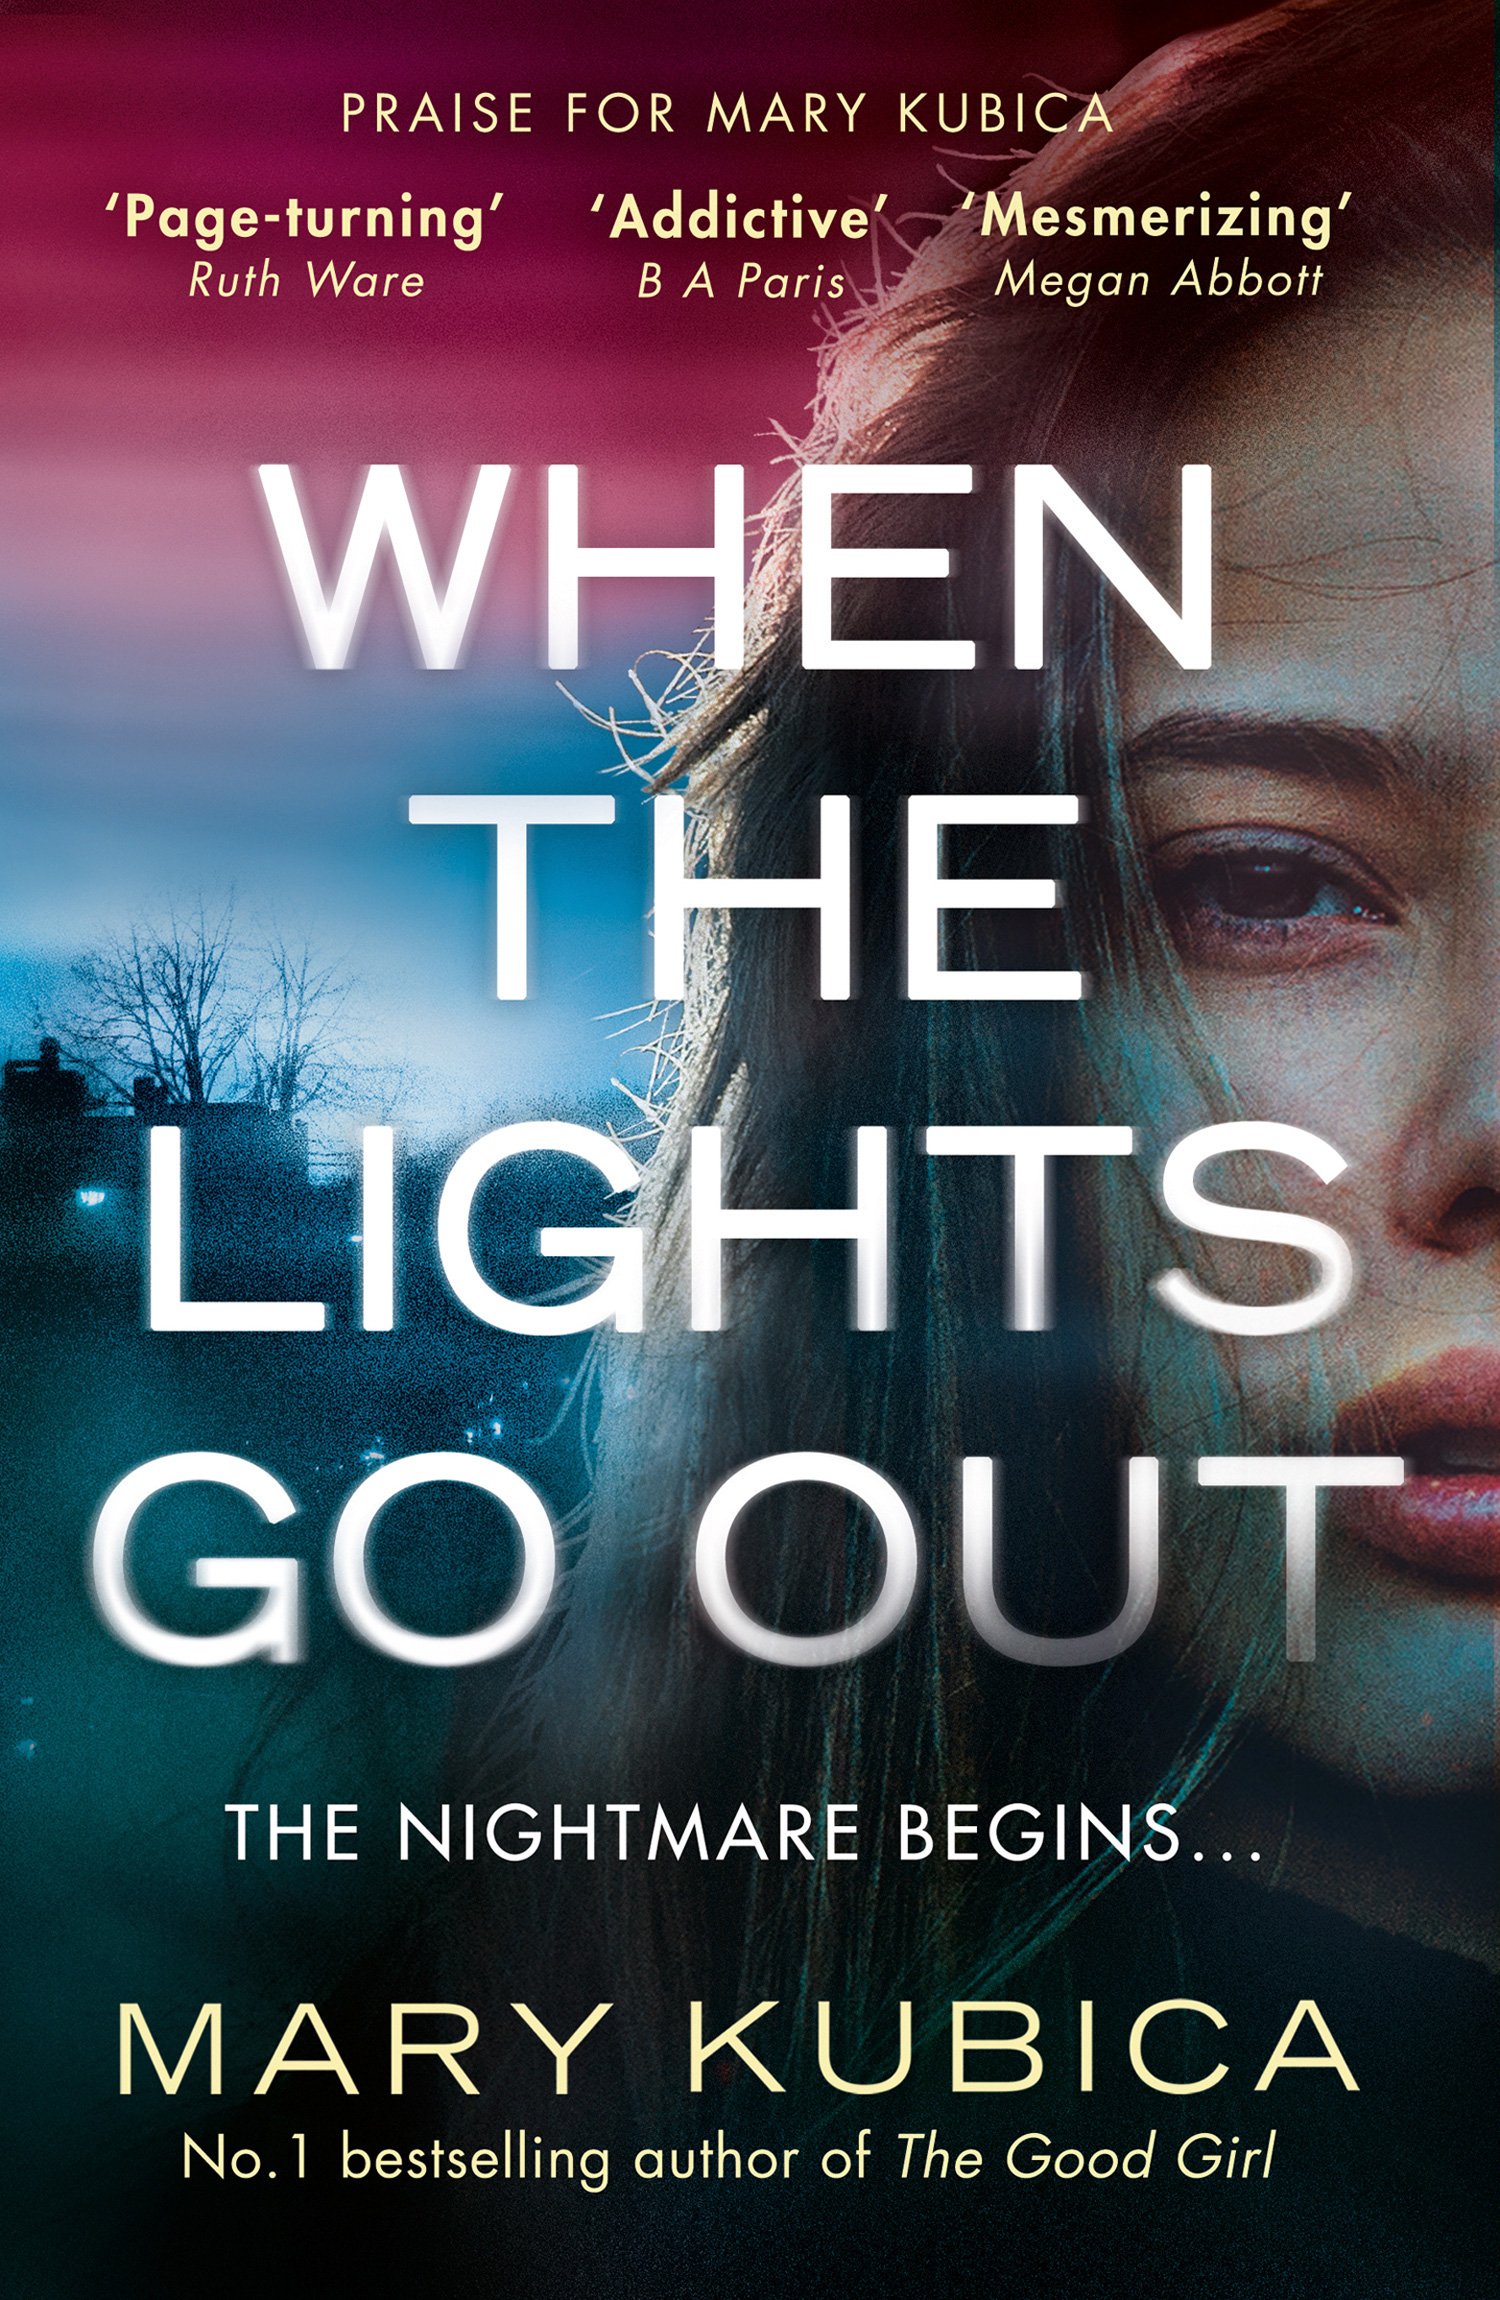 when the lights go out by mary kubica.jpg